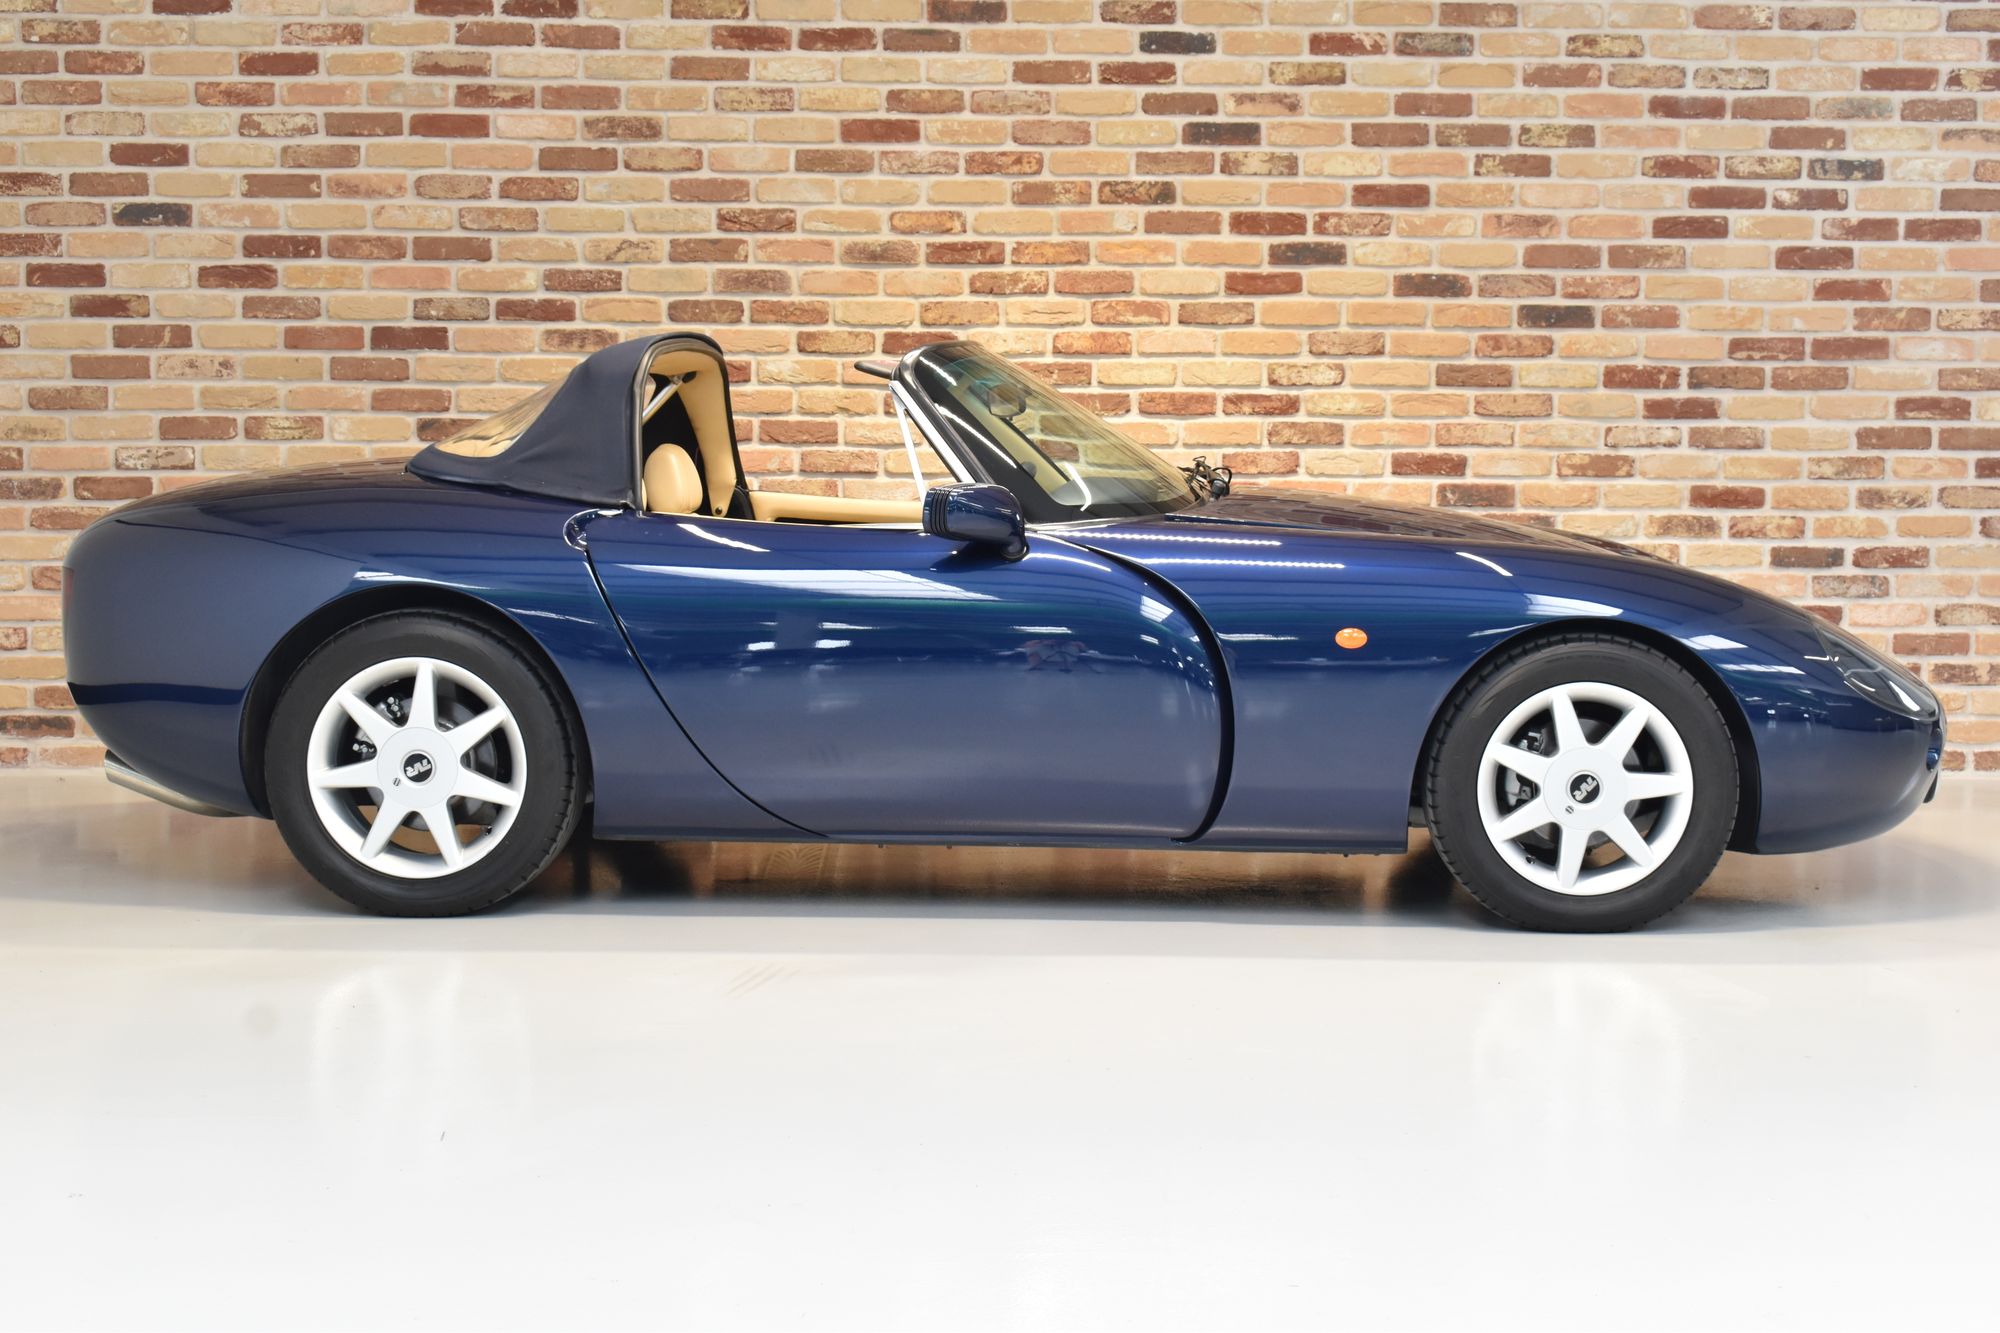 1999 TVR Griffith 500